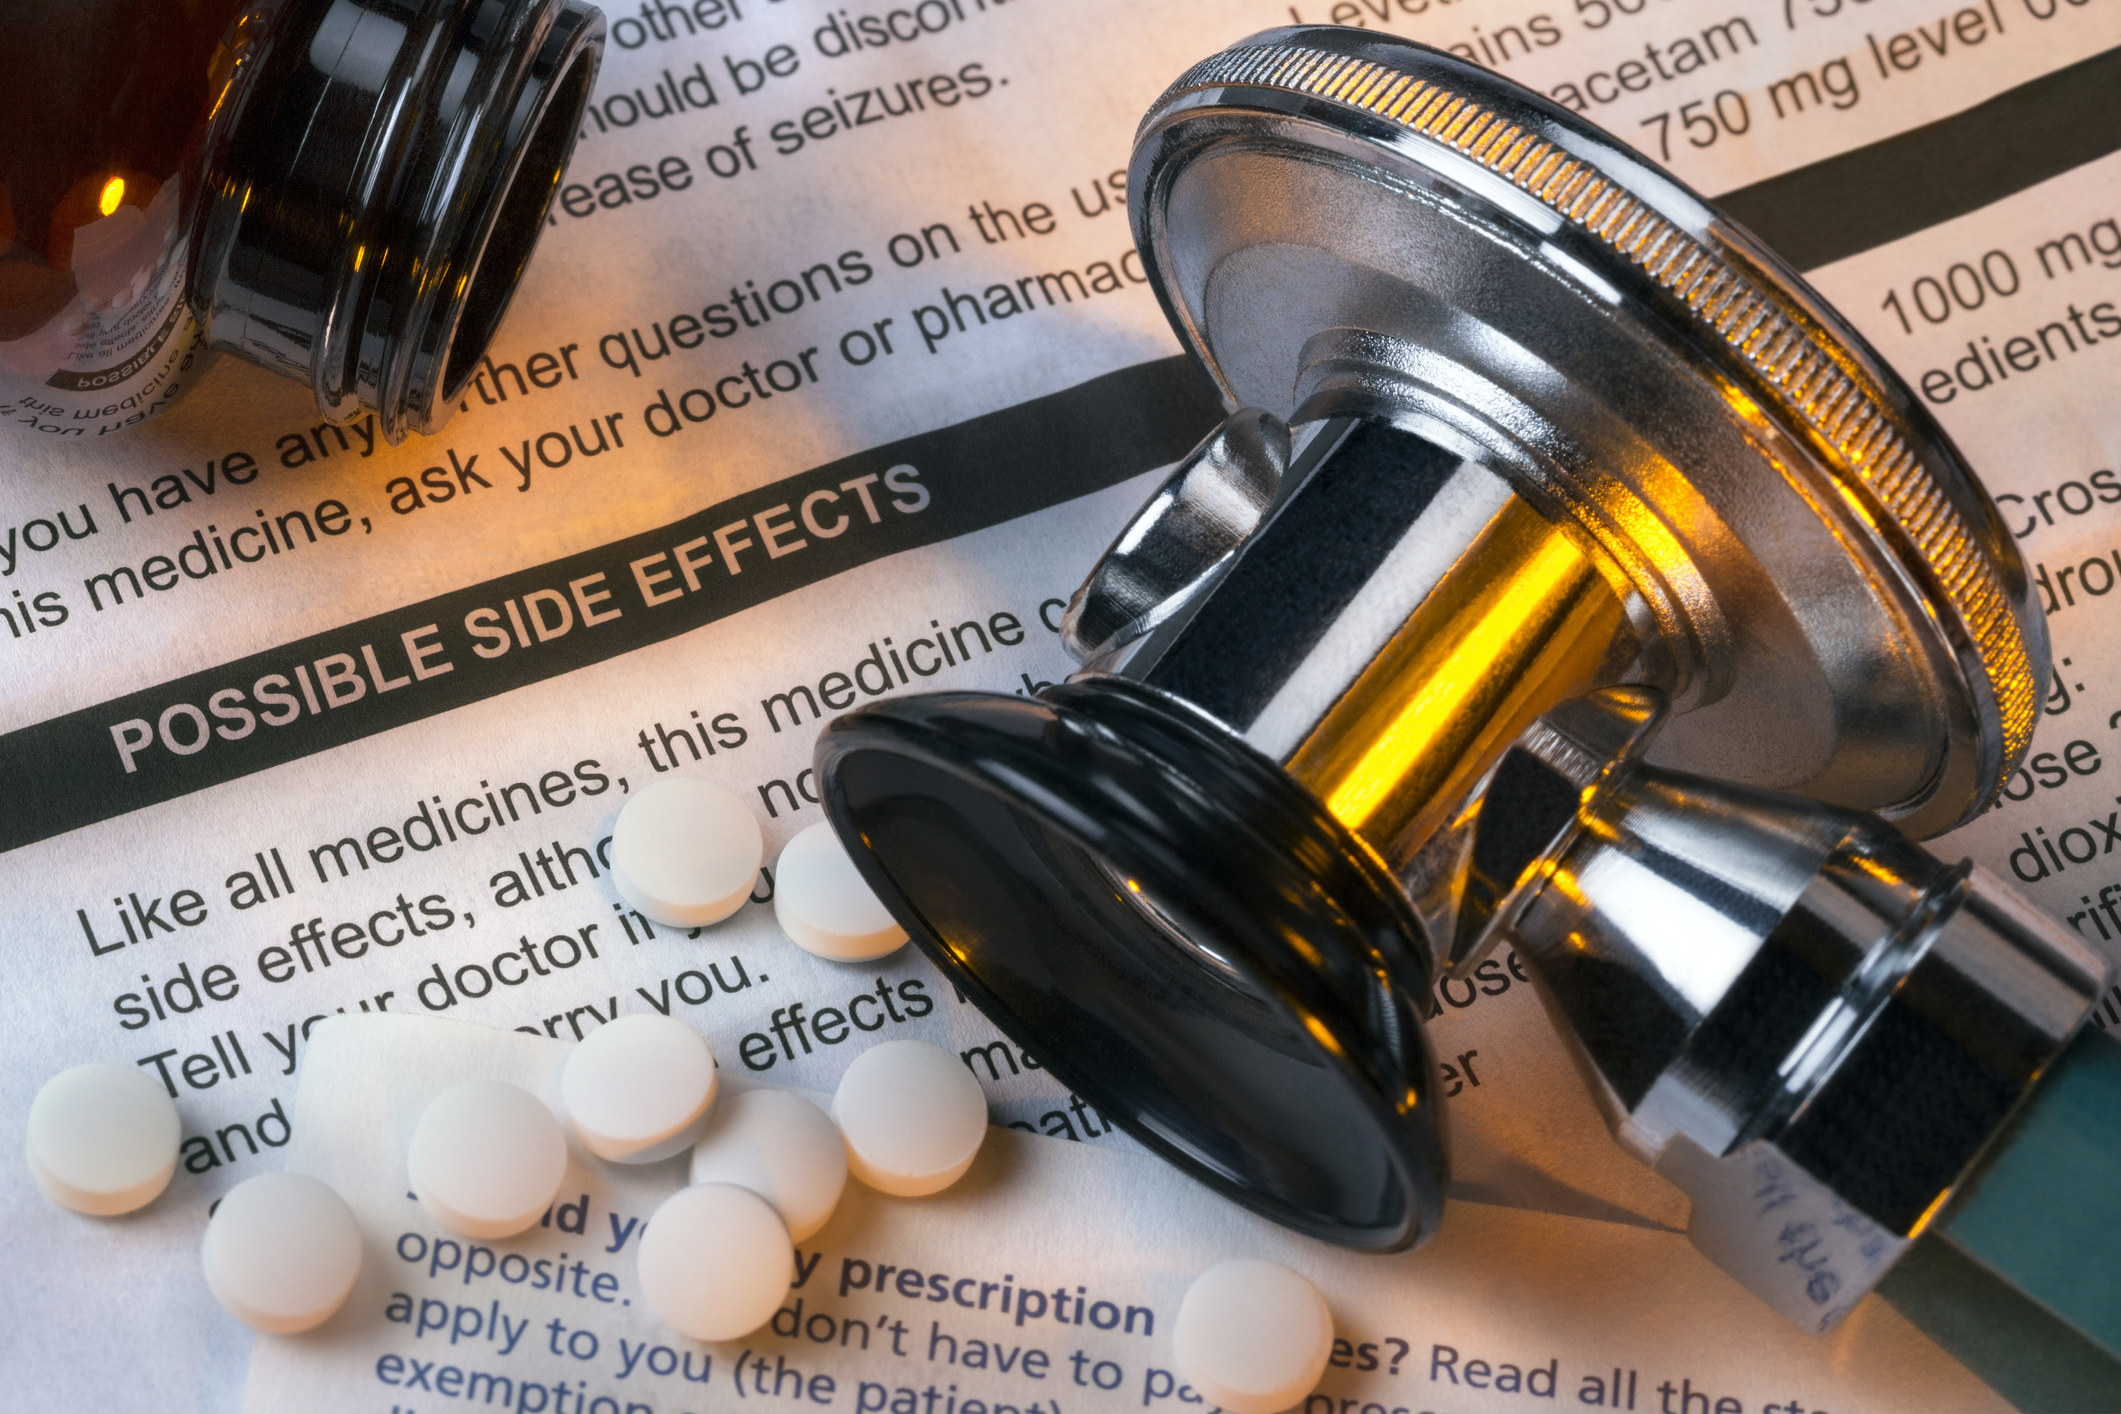 Several pills and a bottle on top of a piece of paper that lists possible side effects